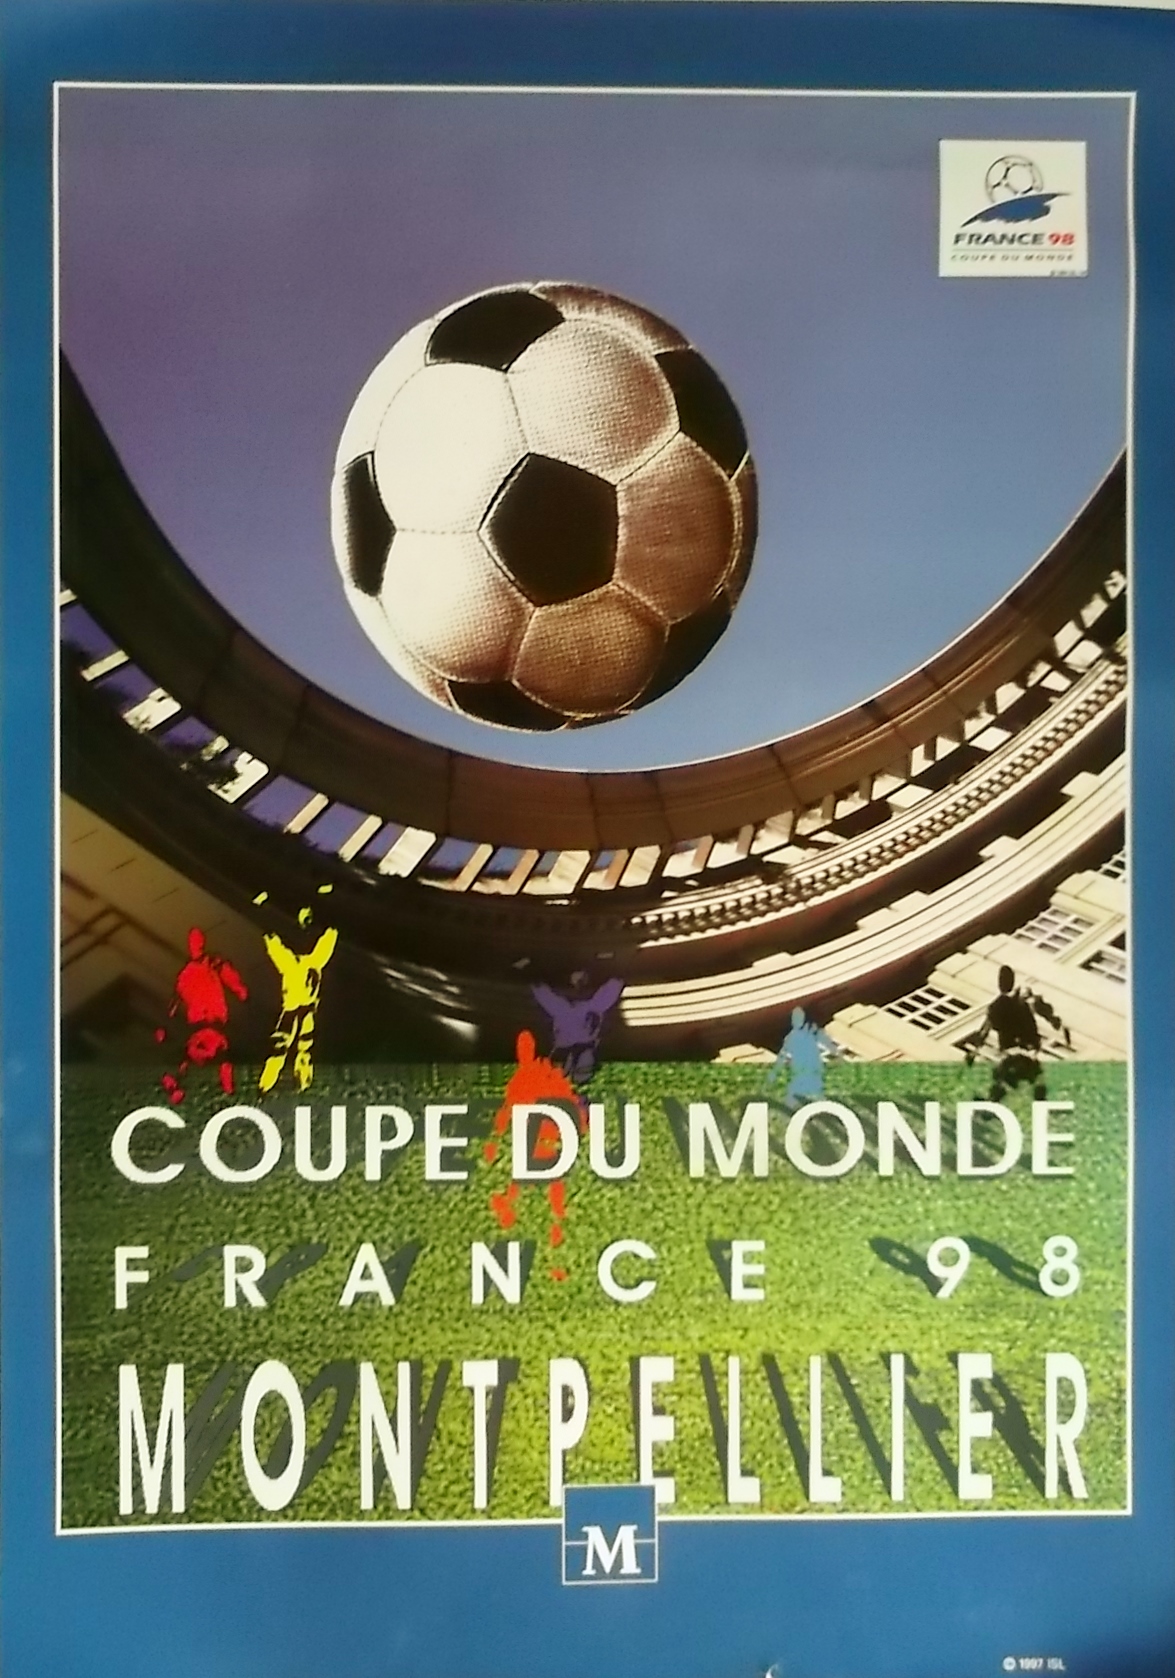 ORIGINAL FRANCE 98 WORLD CUP POSTER - MONTPELLIER